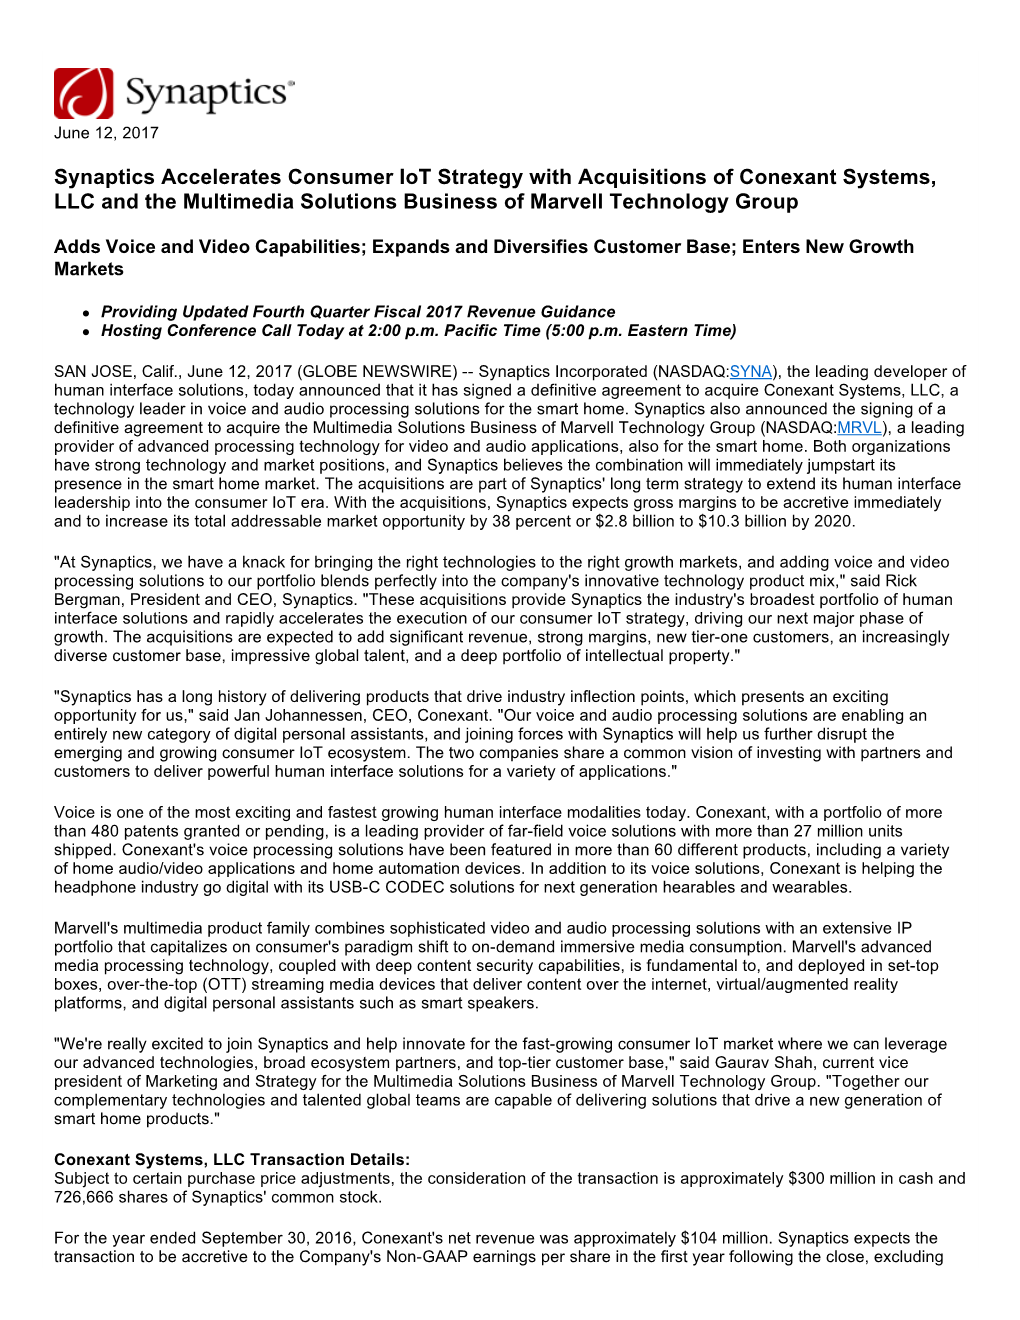 Synaptics Accelerates Consumer Iot Strategy with Acquisitions of Conexant Systems, LLC and the Multimedia Solutions Business of Marvell Technology Group